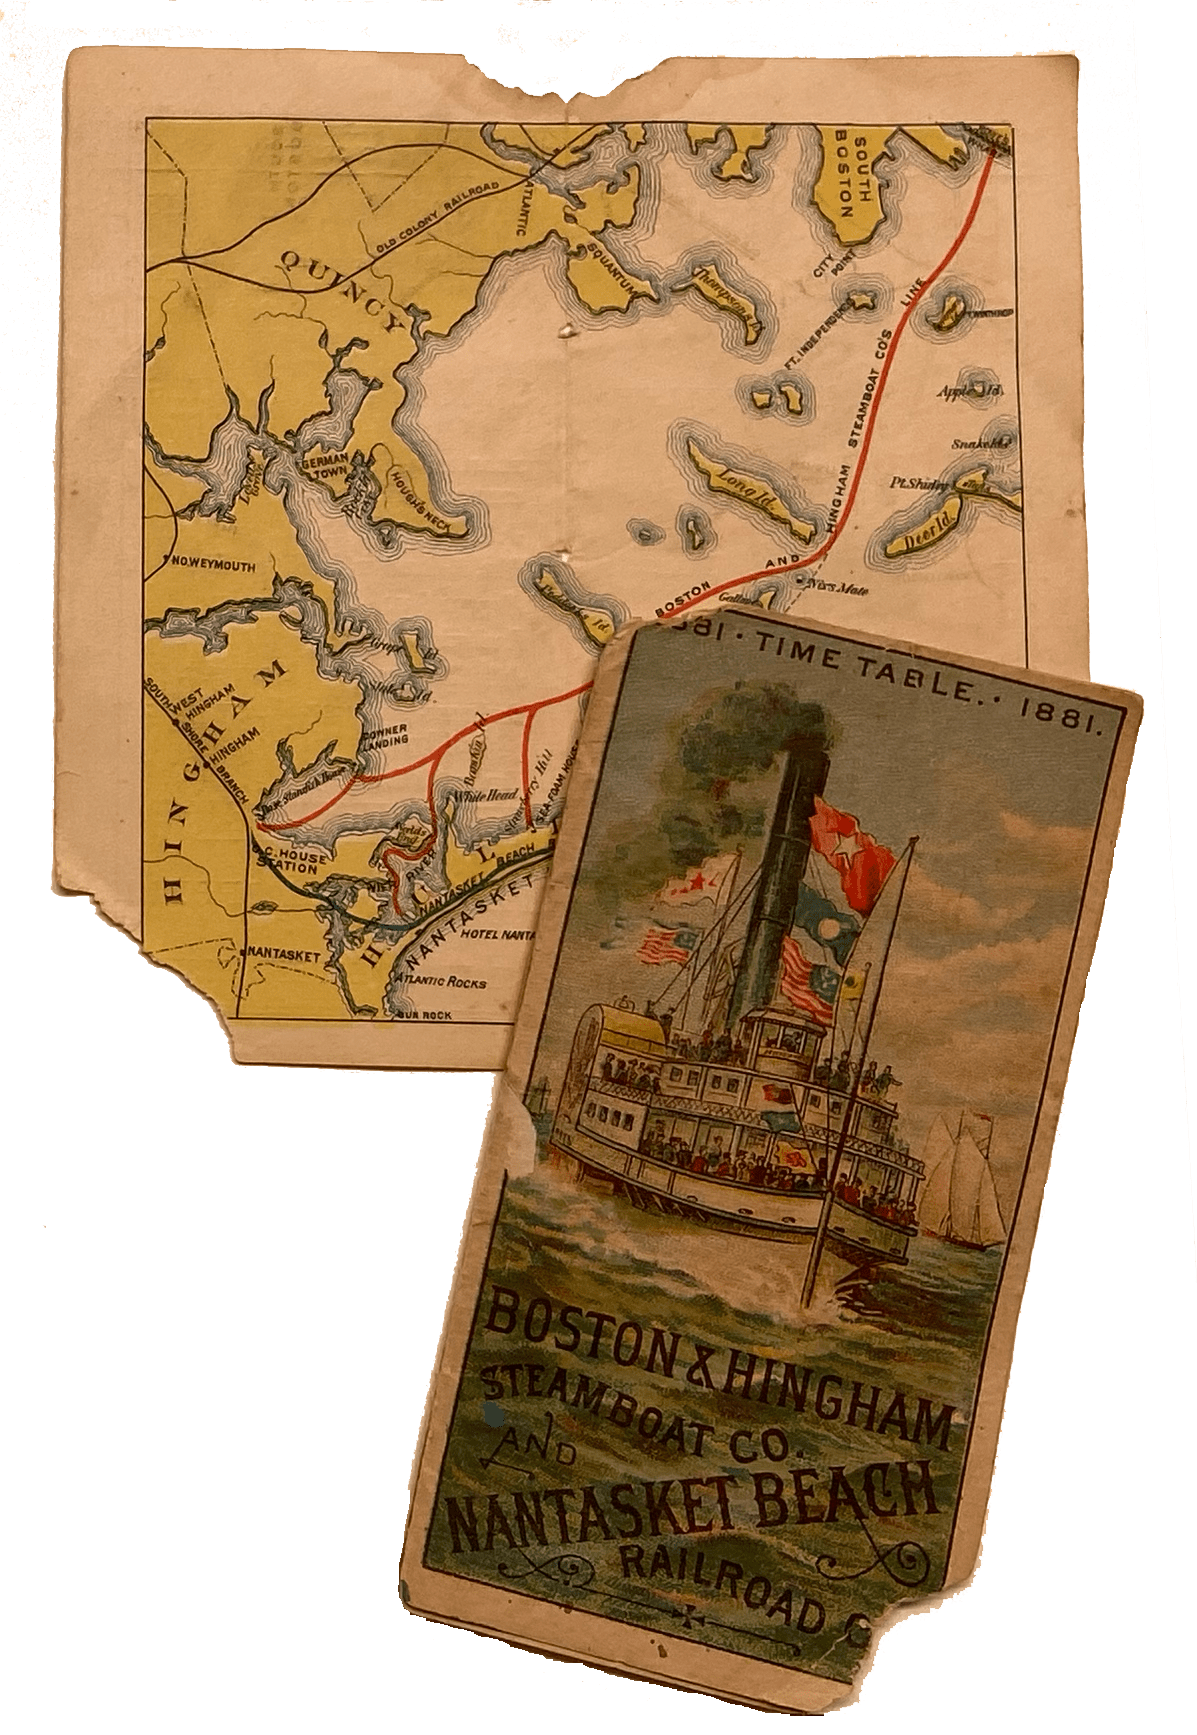 Image of Boston & Hingham Steamboat Co. and Nantasket Beach Railroad Co. 1881 Time Table